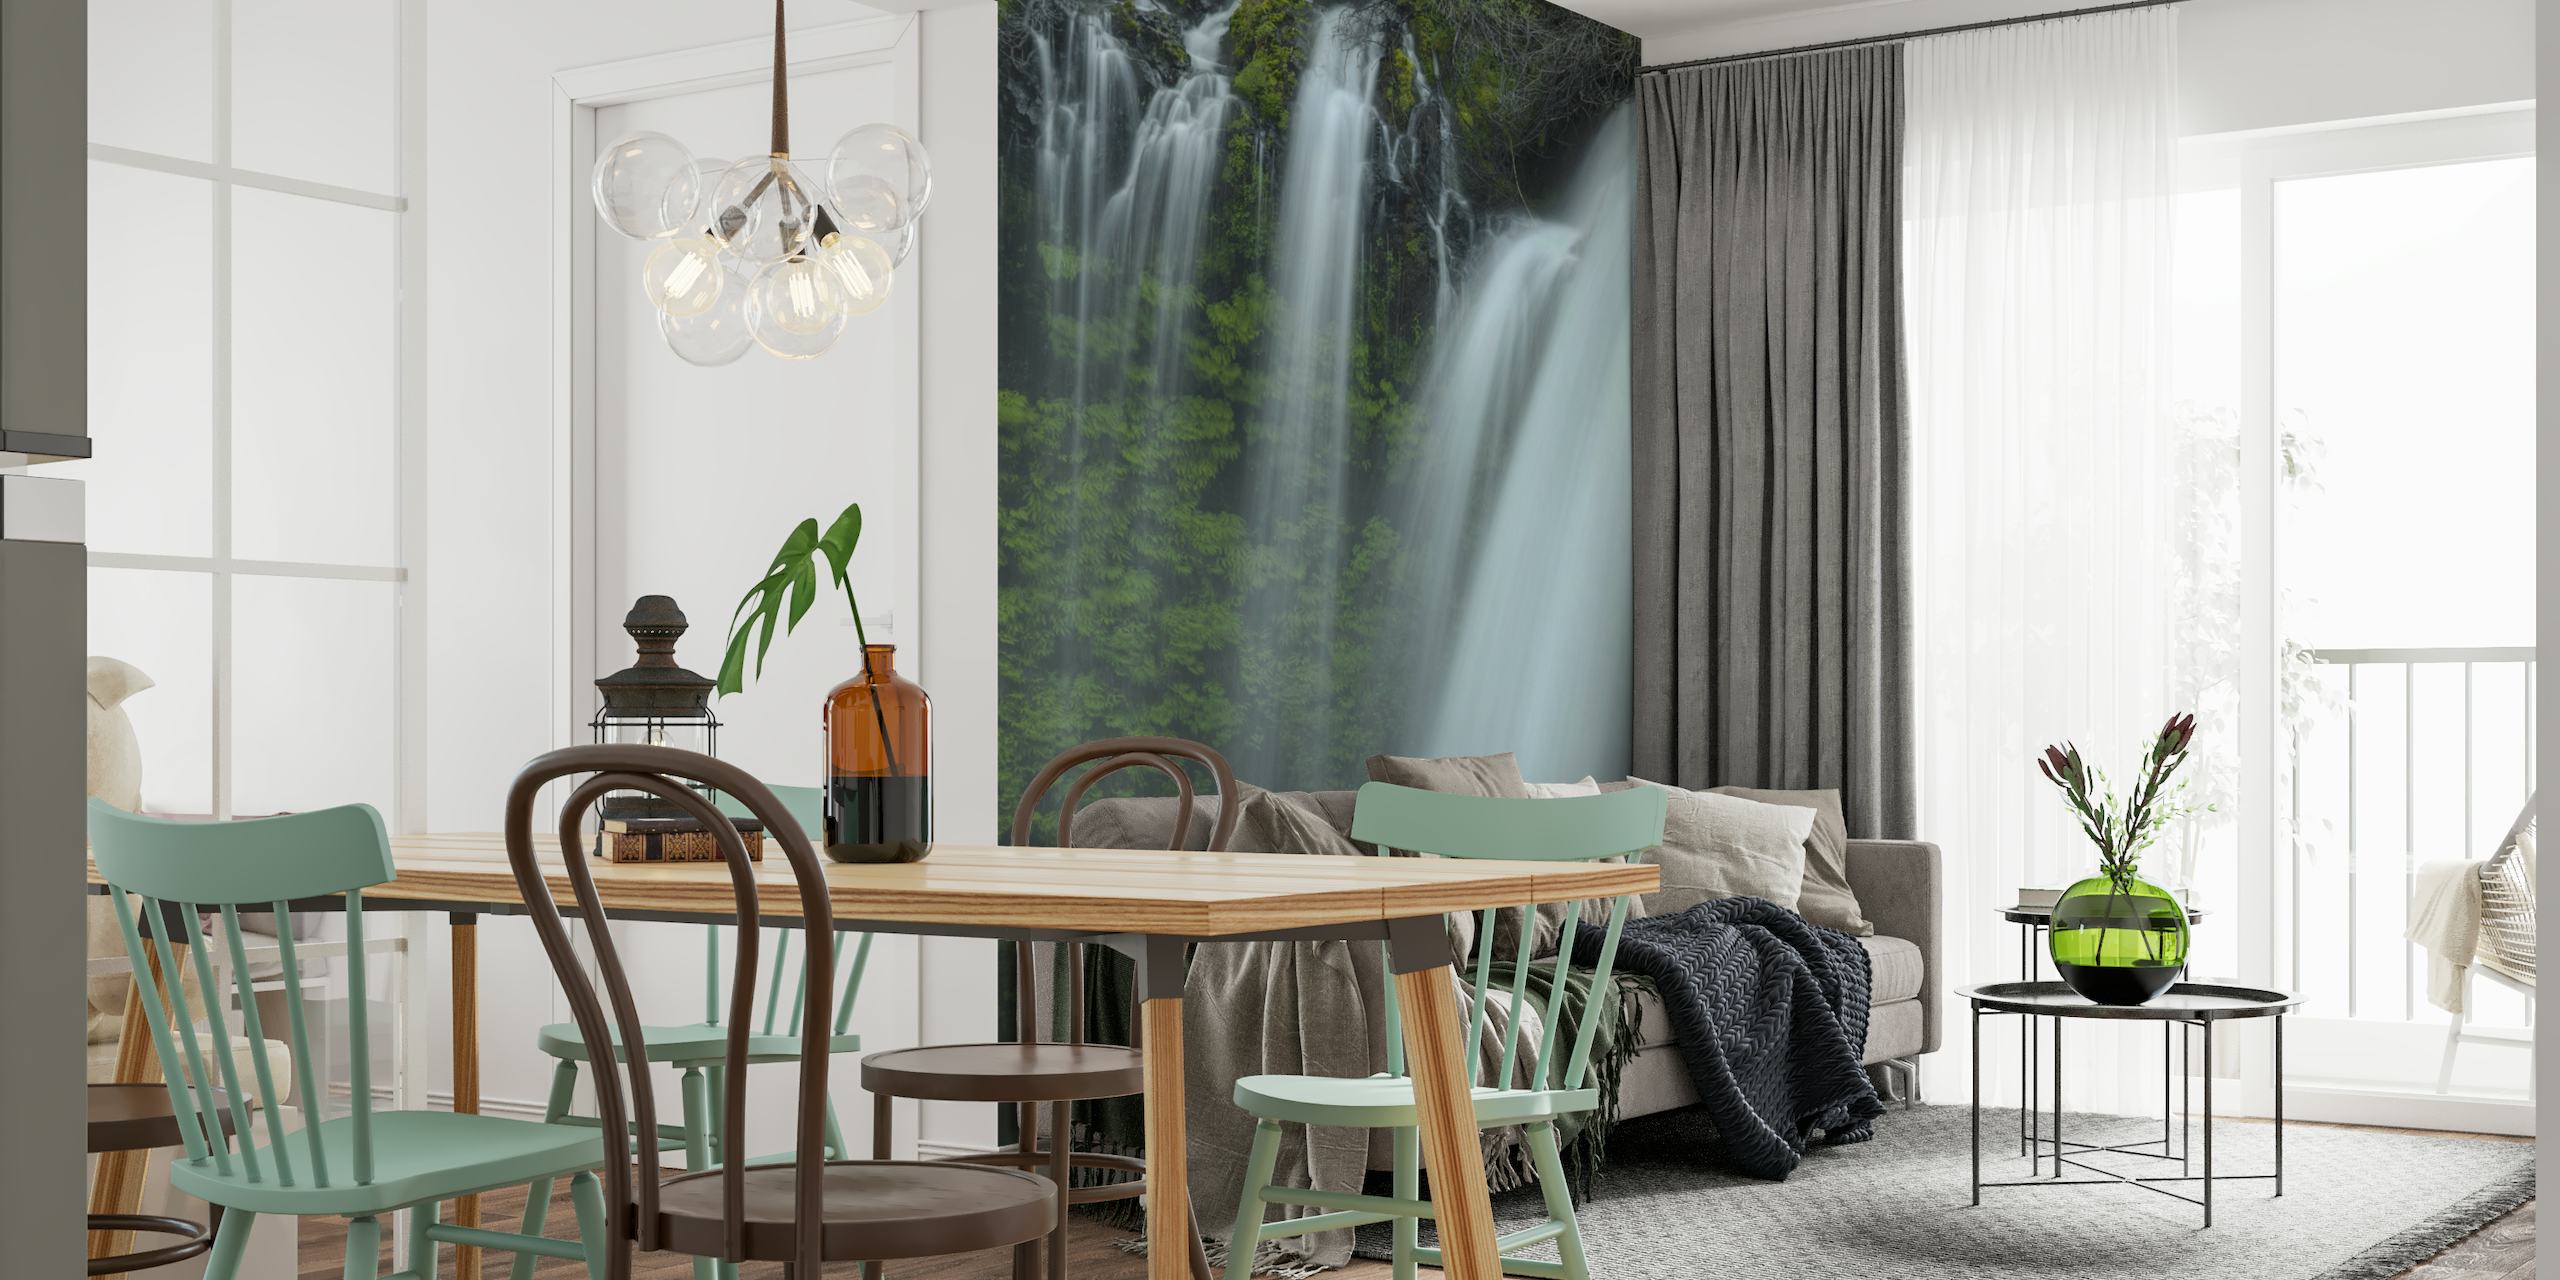 Wall mural of a tranquil waterfall with lush greenery titled 'Drapes of Grace'.